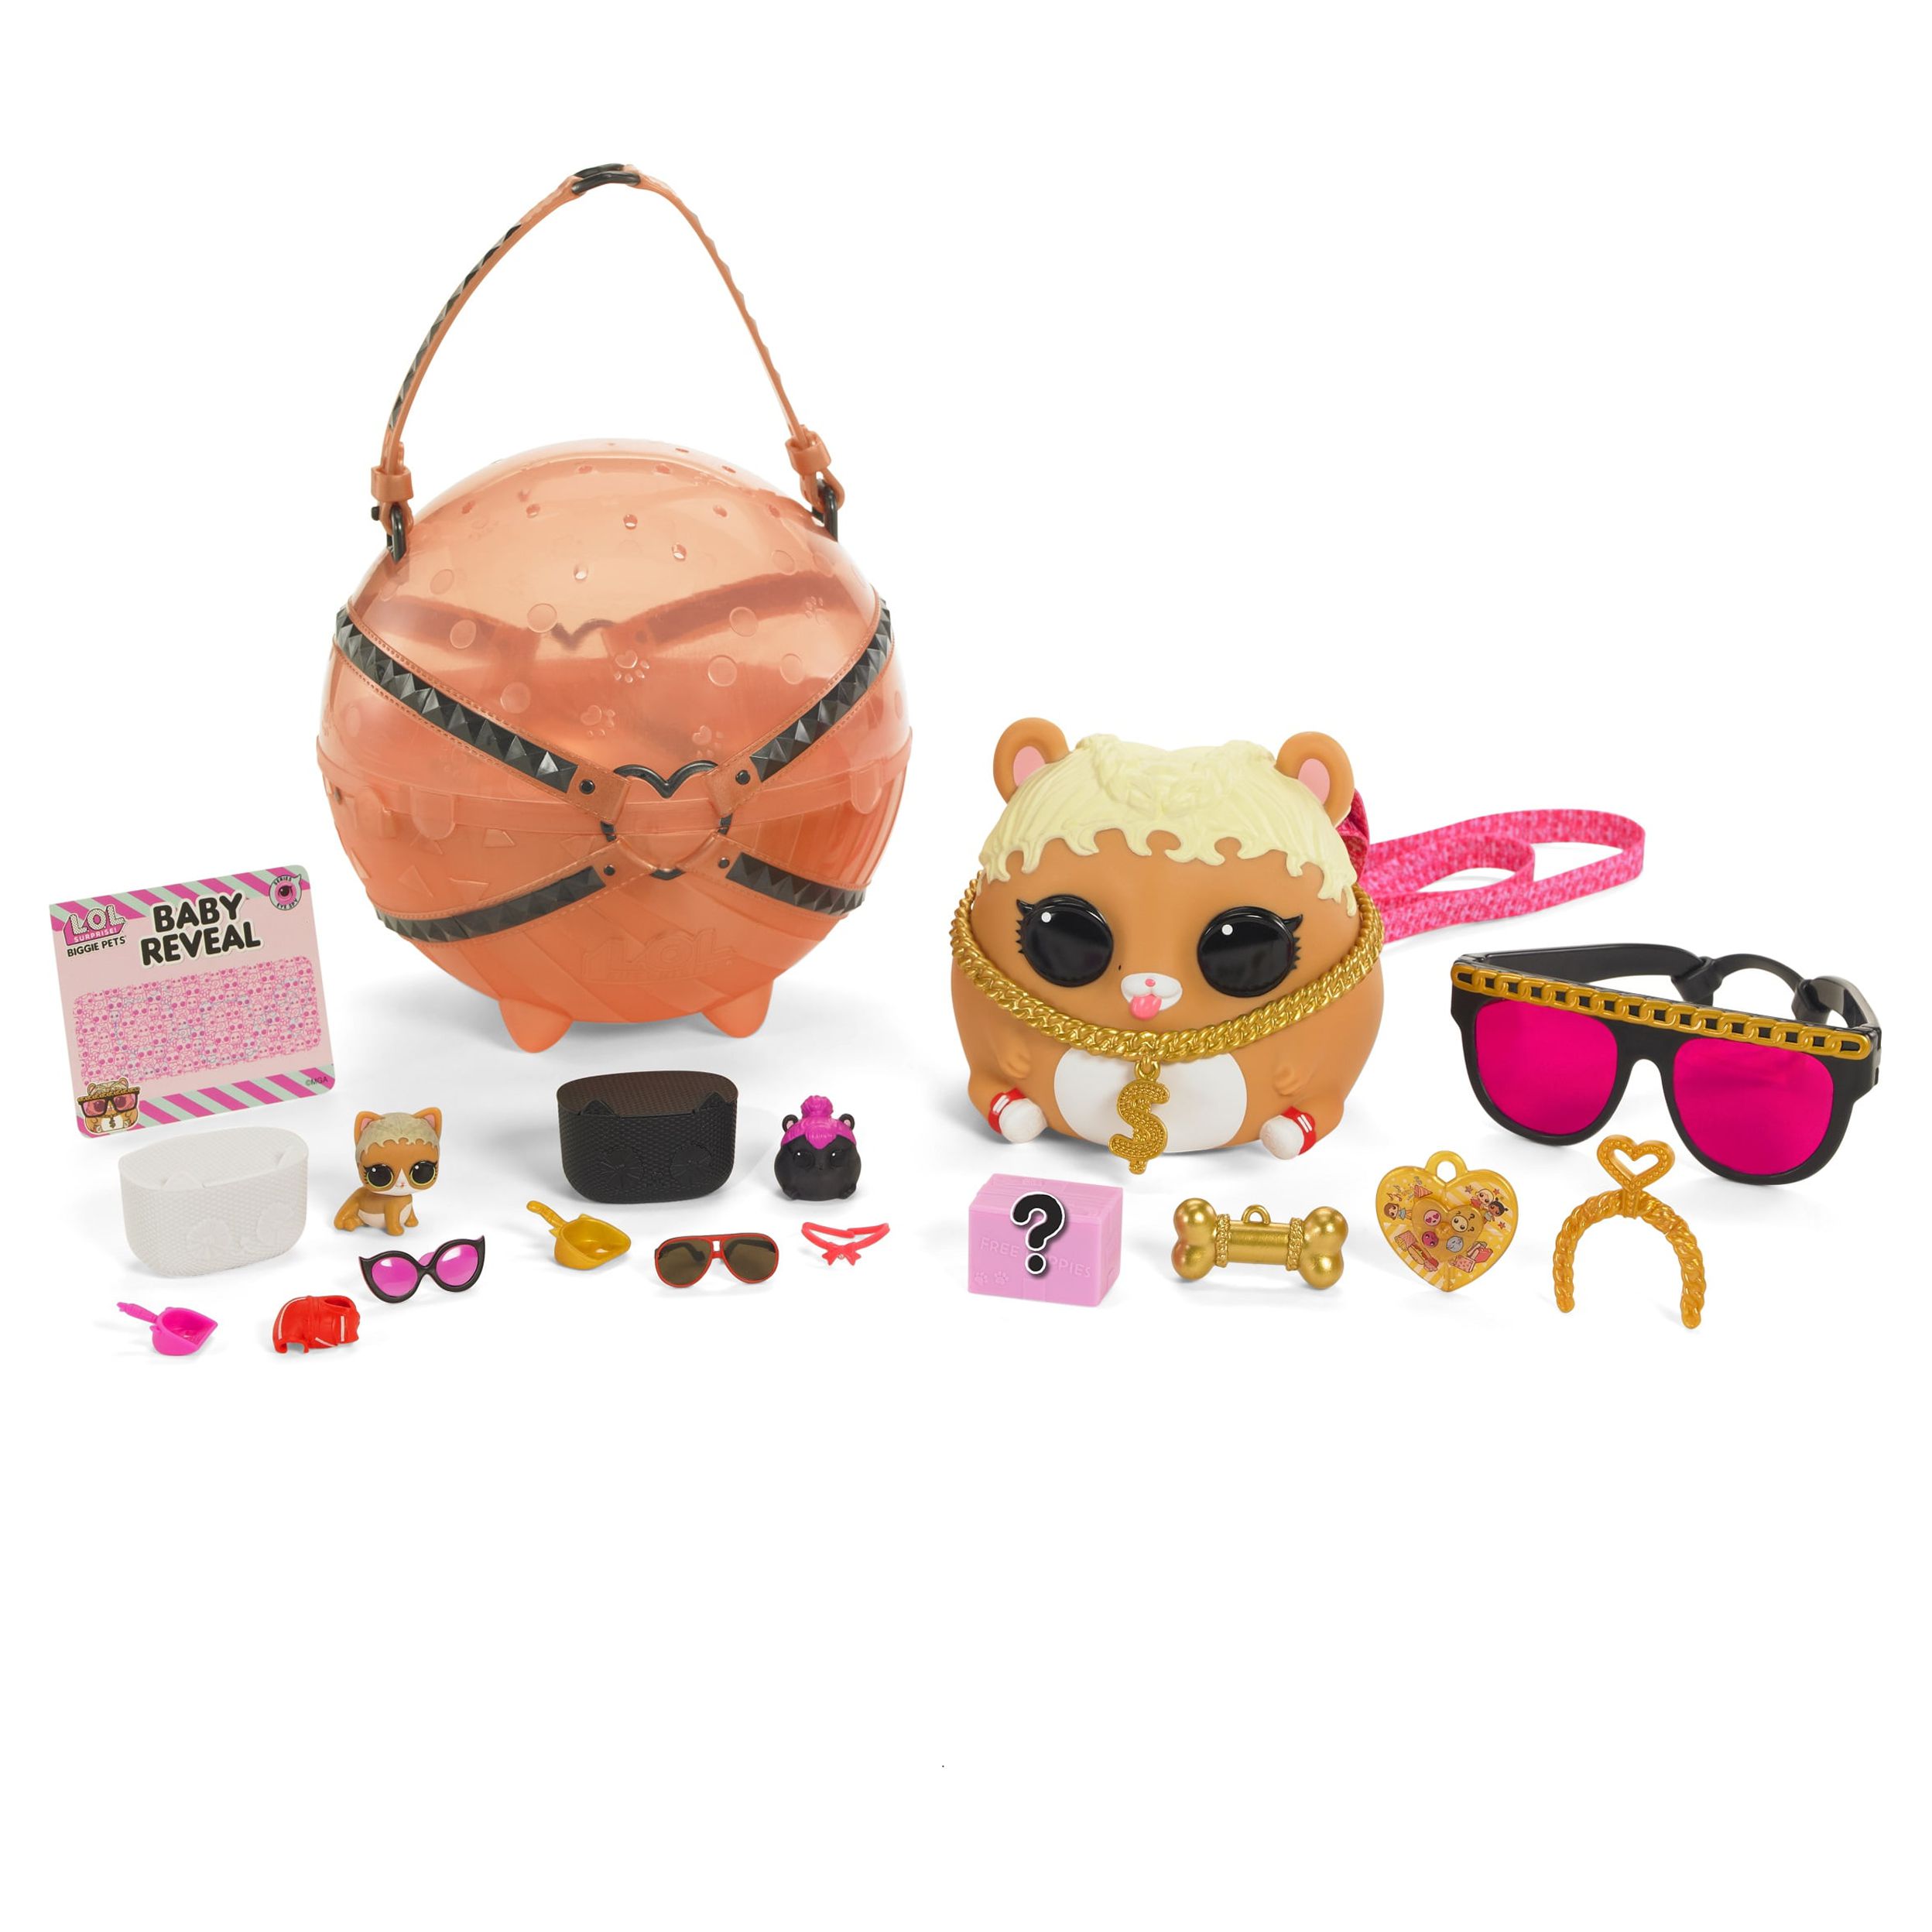 LOL Surprise Biggie Pets - M.C.Hammy Mini Backpack & Accessories, Great Gift for Kids Ages 4 5 6+ - image 1 of 5